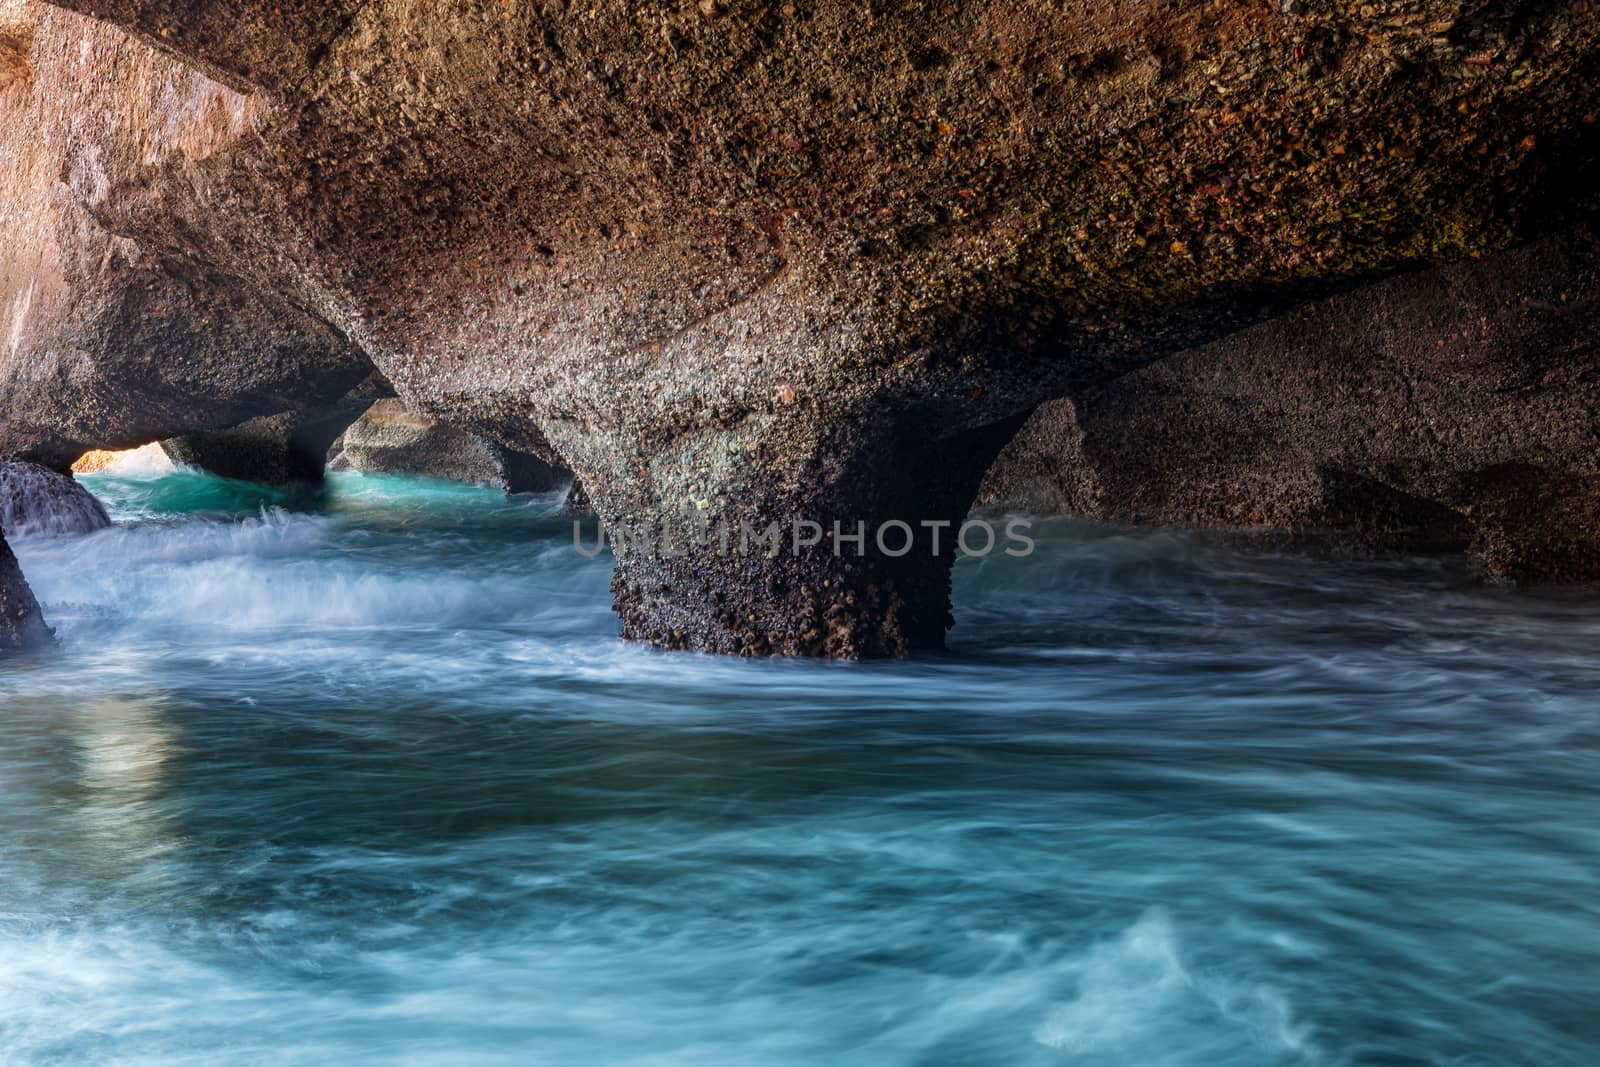 Exploring sea caves along the coastline that have formed and eroded over time into natural arches and columns